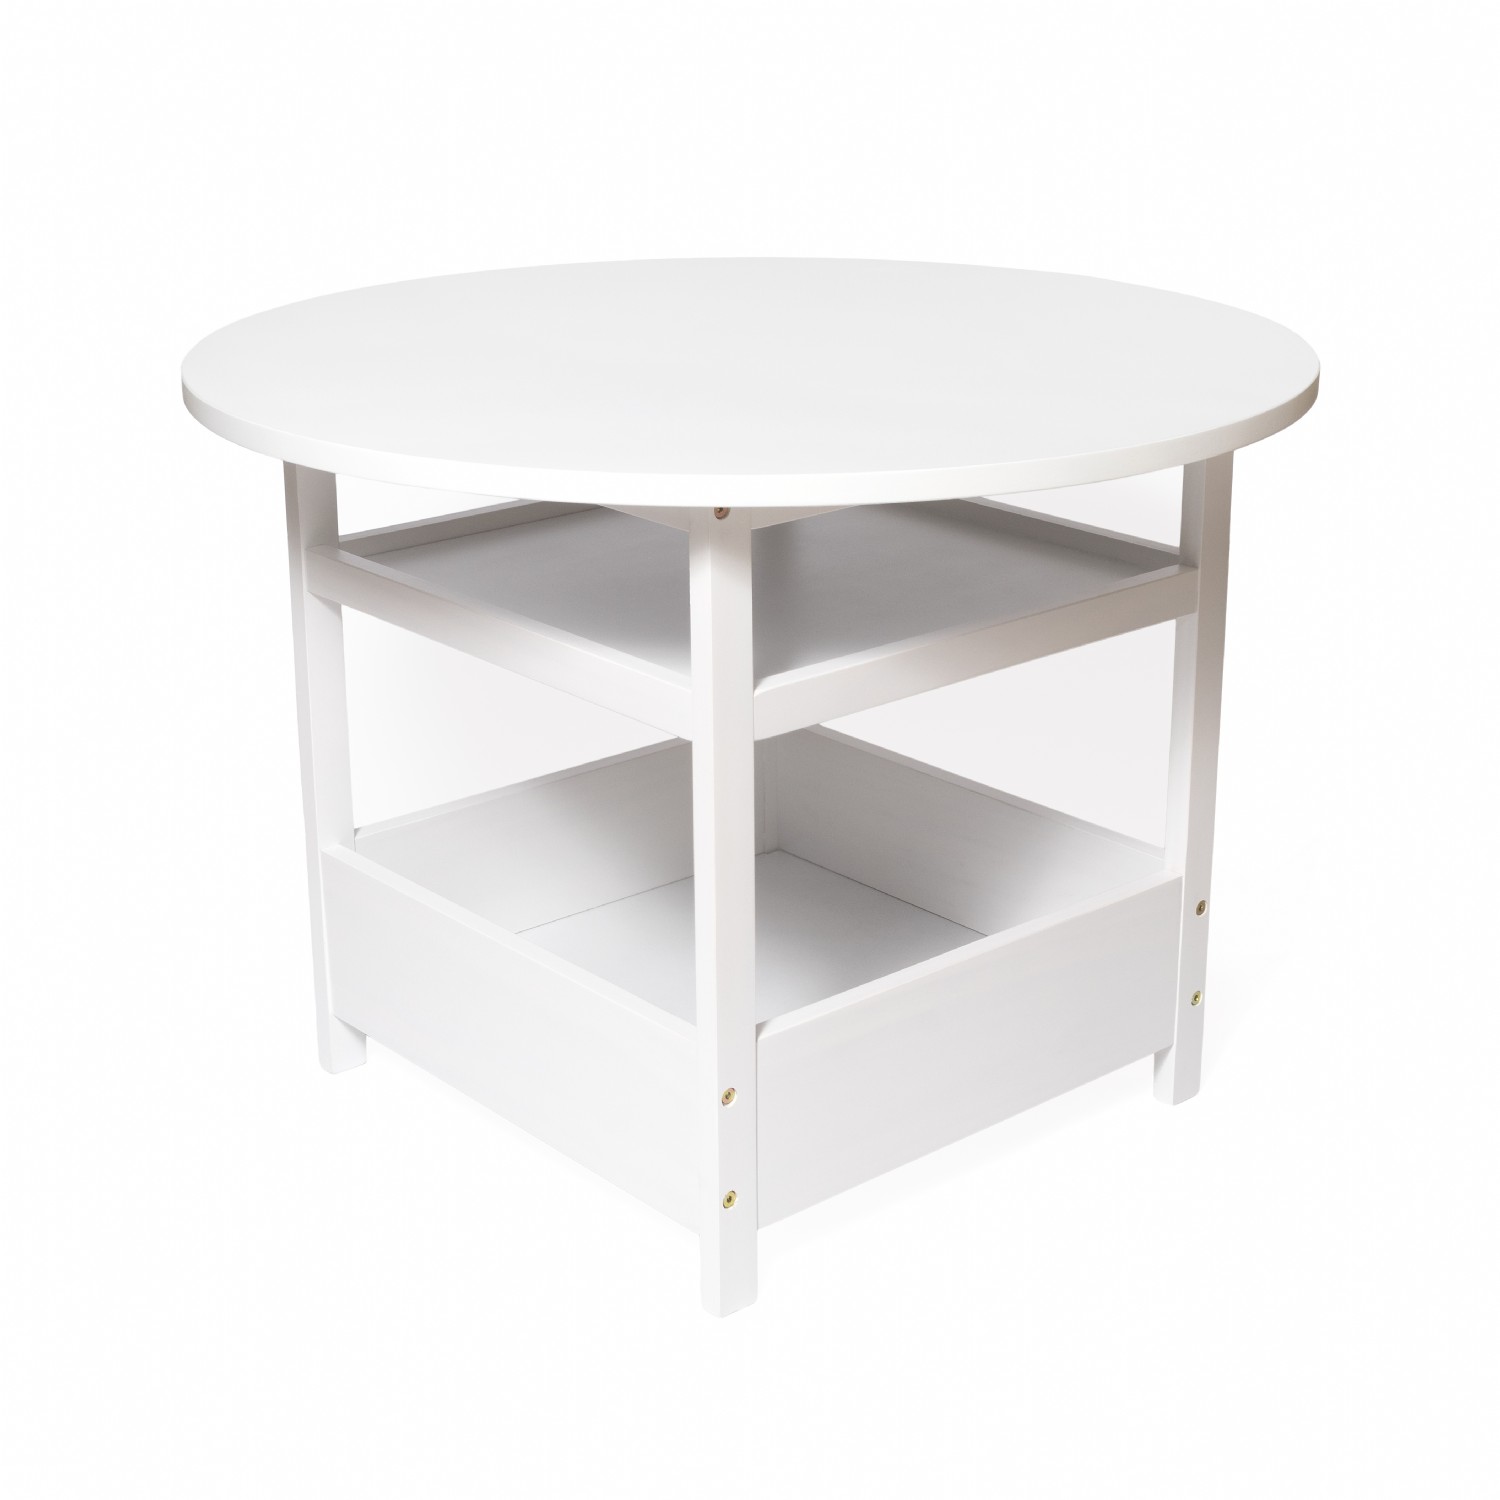 Tables Chairs White Lipper International 524w Childs Round Table